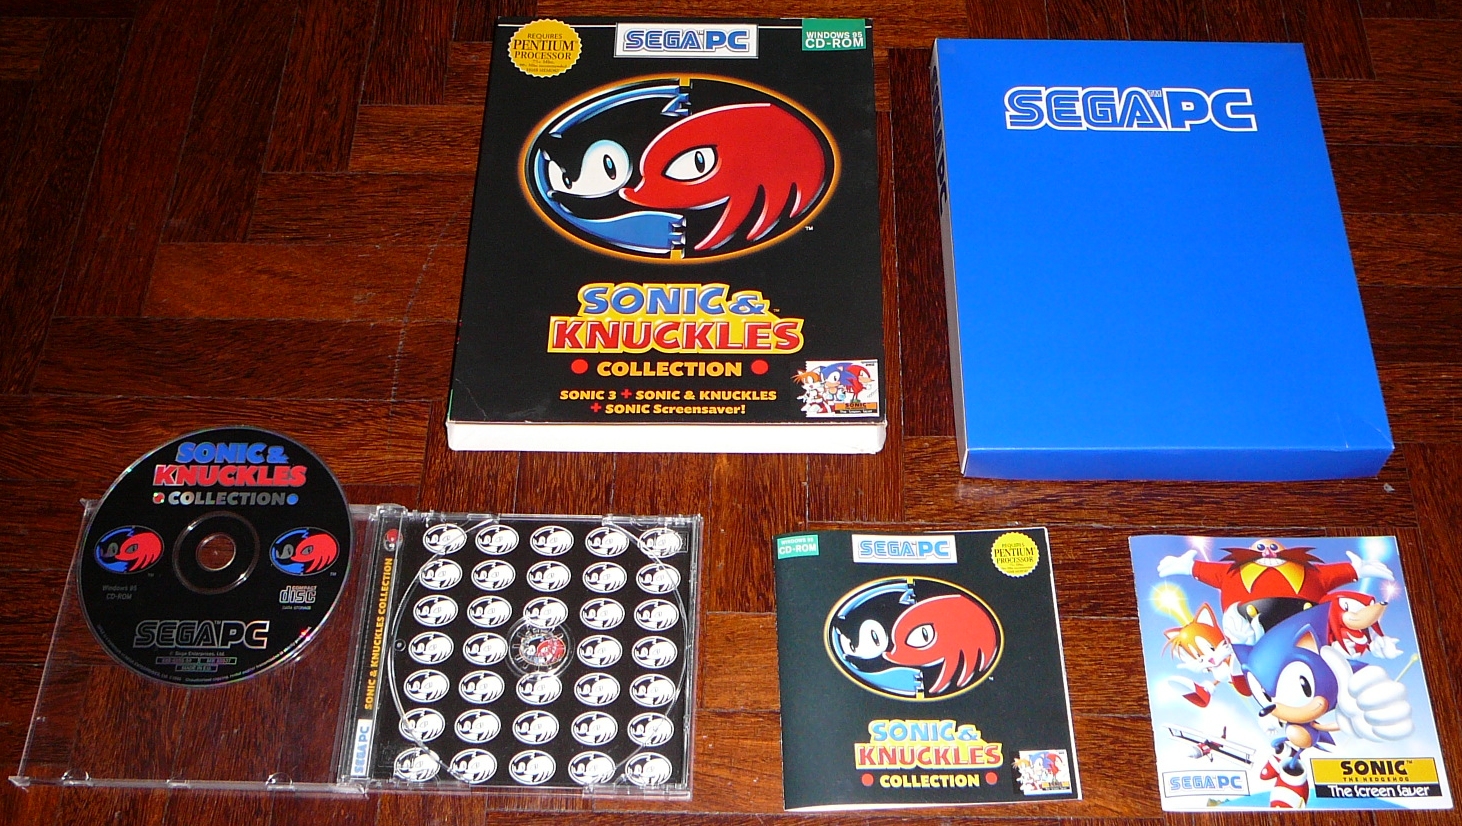 Sonic & Knuckles Collection - Sonic the Hedgehog 3 - PC CD-ROM